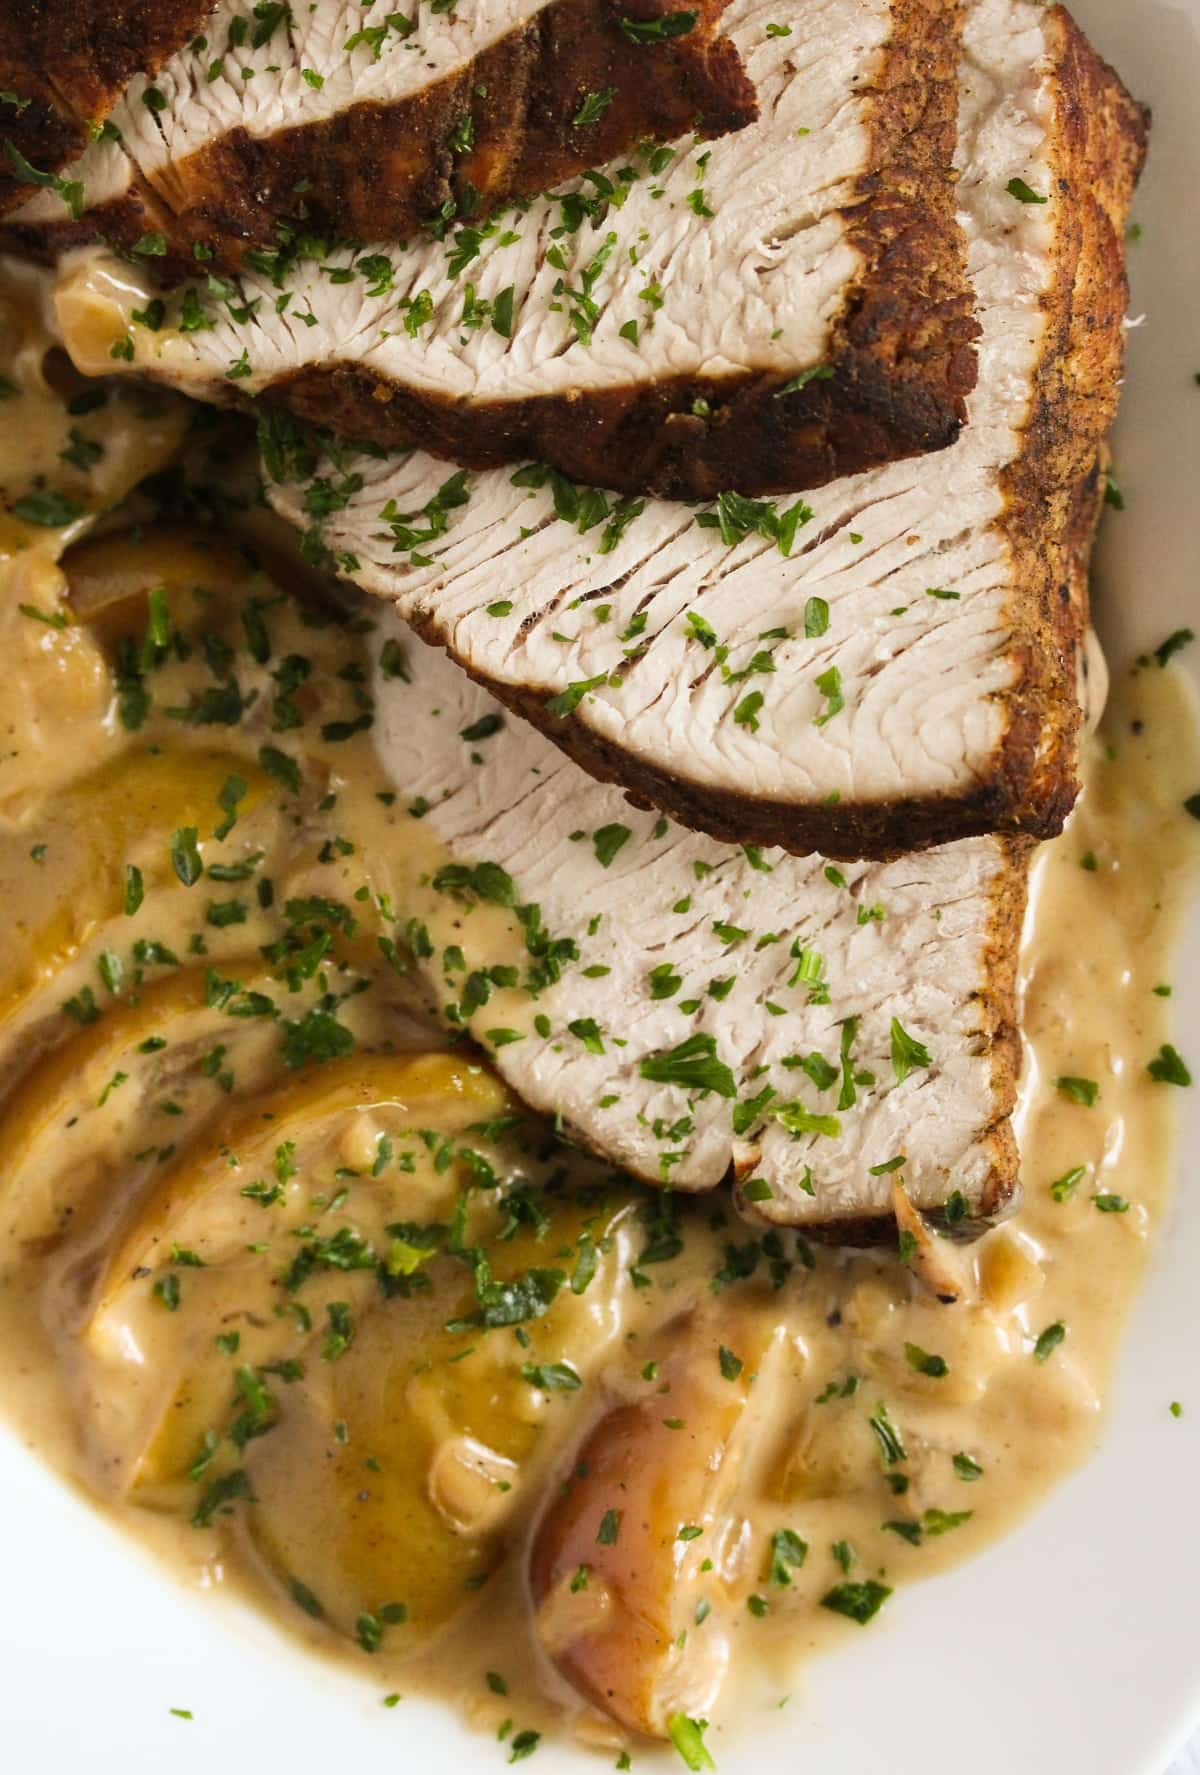 slices of turkey breast on a bed of apples with cream sauce.